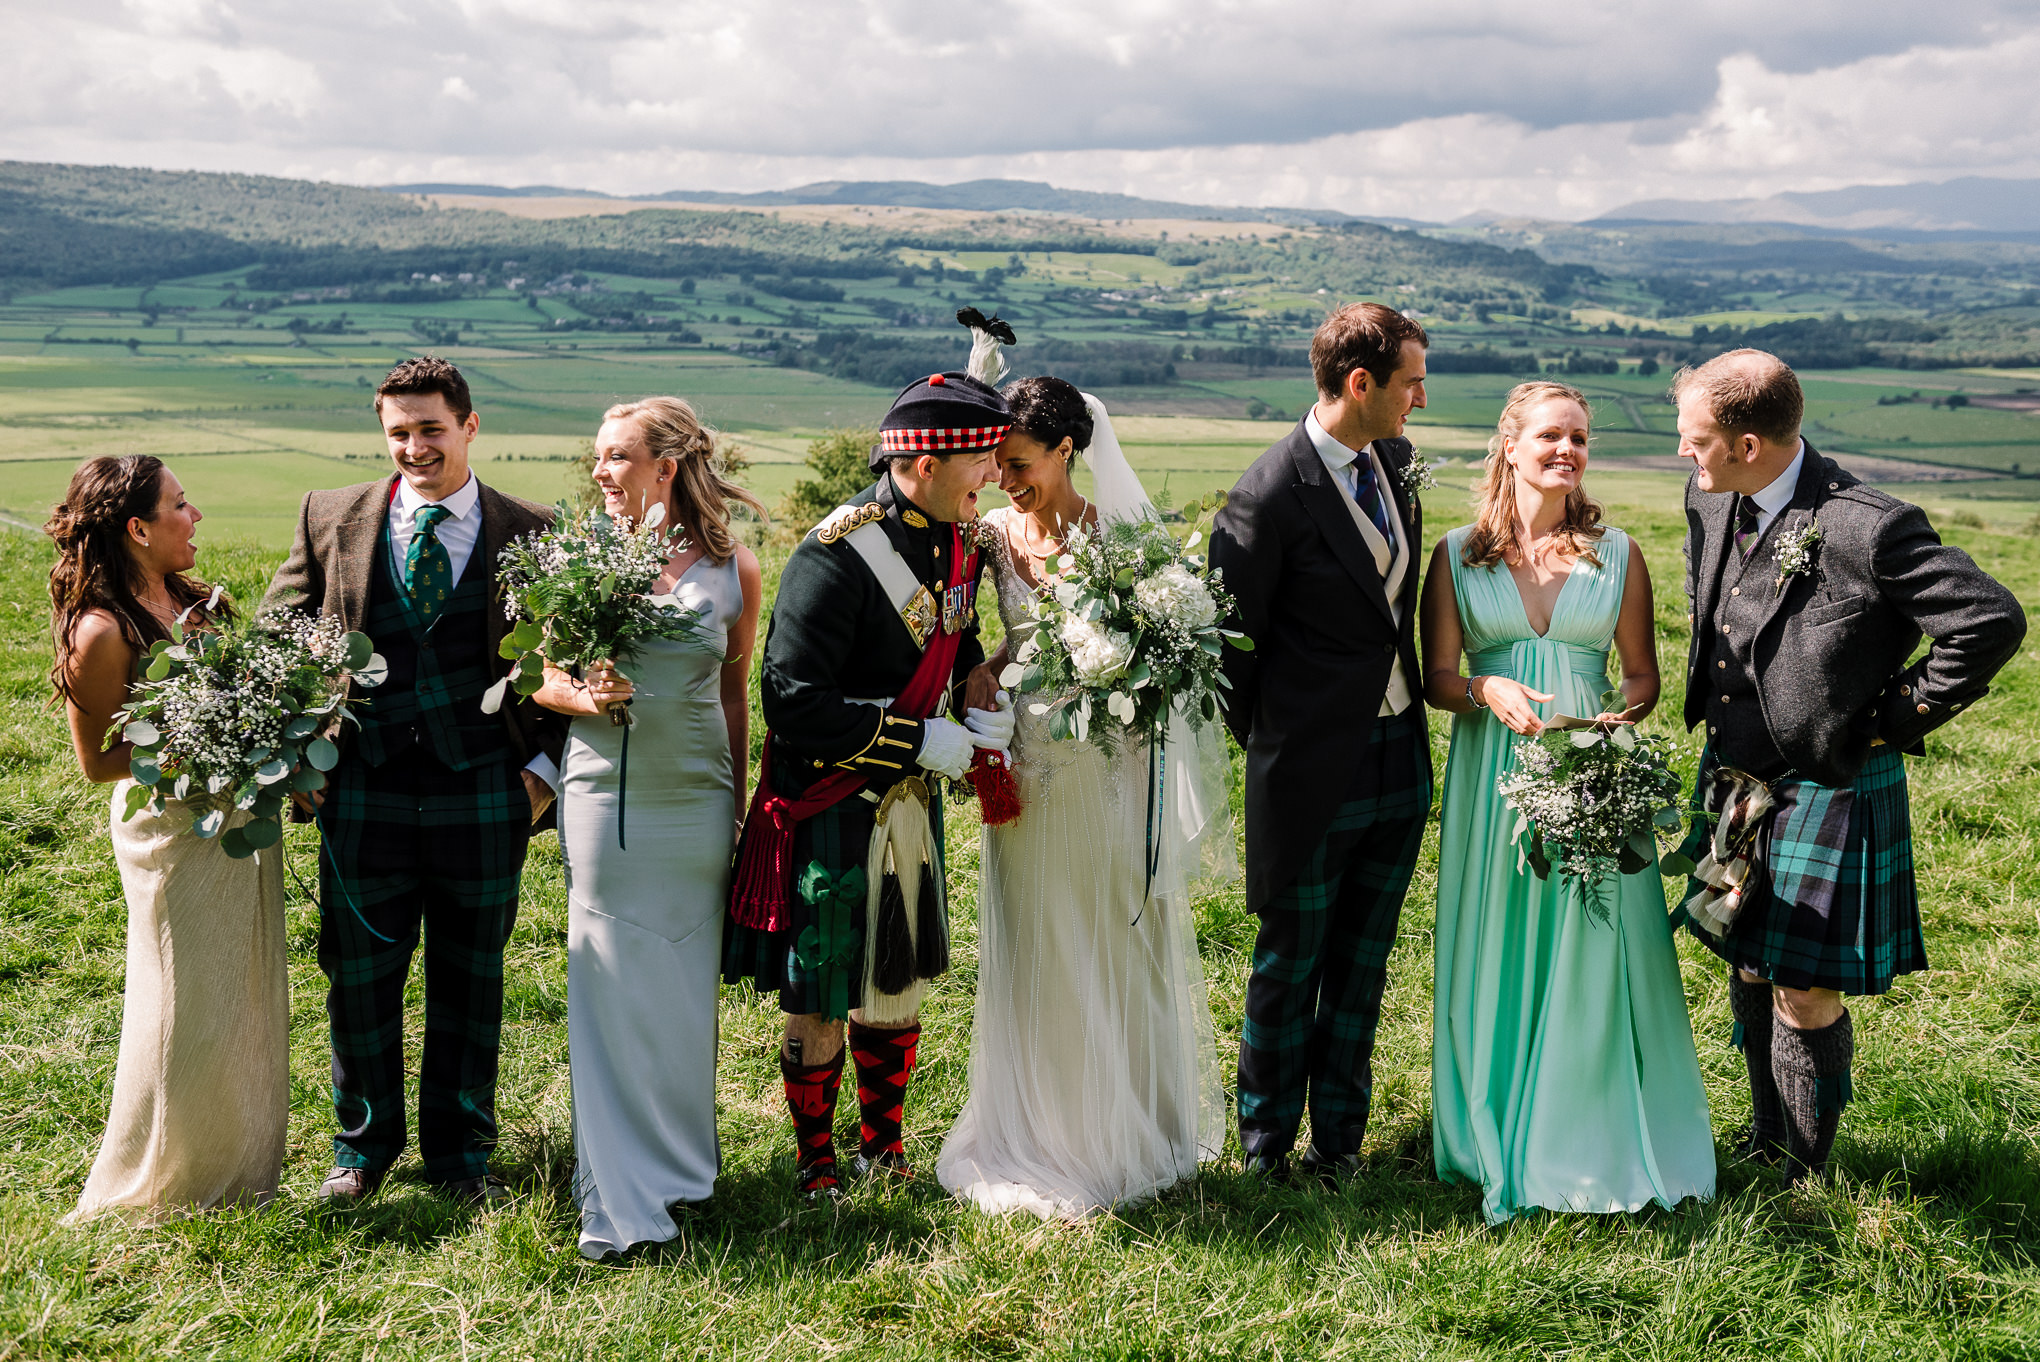 Natural photo of bridal party on the hillside. Lake district wedding photography